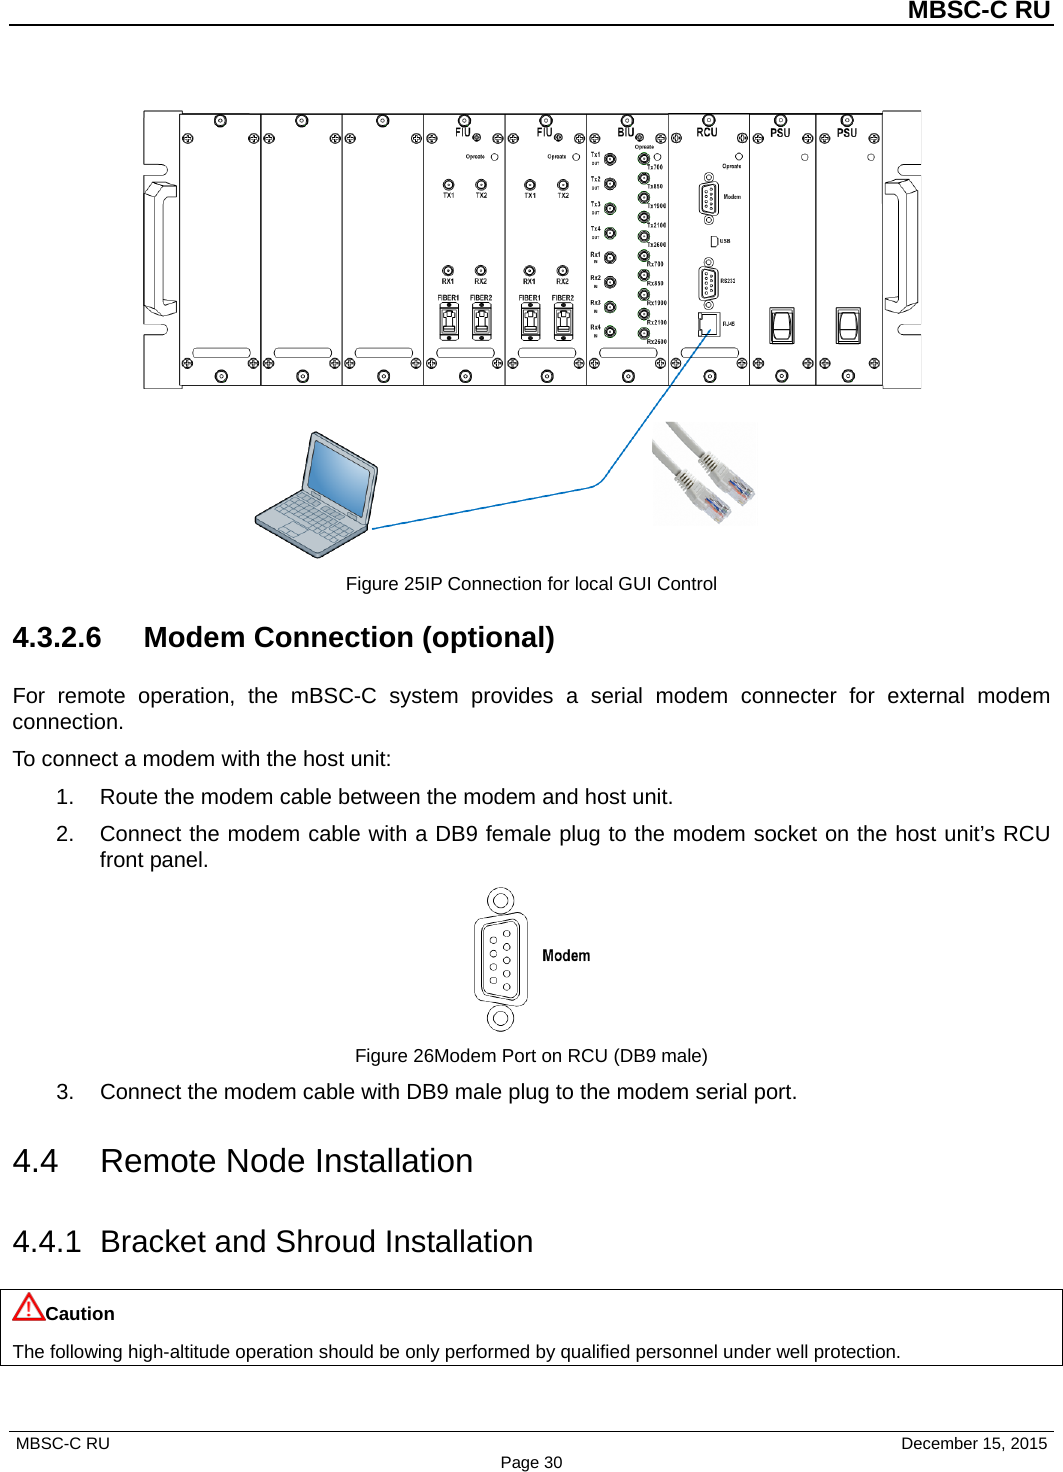          MBSC-C RU   MBSC-C RU                                     December 15, 2015 Page 30  Figure 25IP Connection for local GUI Control 4.3.2.6 Modem Connection (optional) For remote operation,  the  mBSC-C  system provides a serial modem connecter for external modem connection. To connect a modem with the host unit: 1. Route the modem cable between the modem and host unit. 2. Connect the modem cable with a DB9 female plug to the modem socket on the host unit’s RCU front panel.  Figure 26Modem Port on RCU (DB9 male) 3. Connect the modem cable with DB9 male plug to the modem serial port. 4.4 Remote Node Installation 4.4.1 Bracket and Shroud Installation Caution The following high-altitude operation should be only performed by qualified personnel under well protection. 